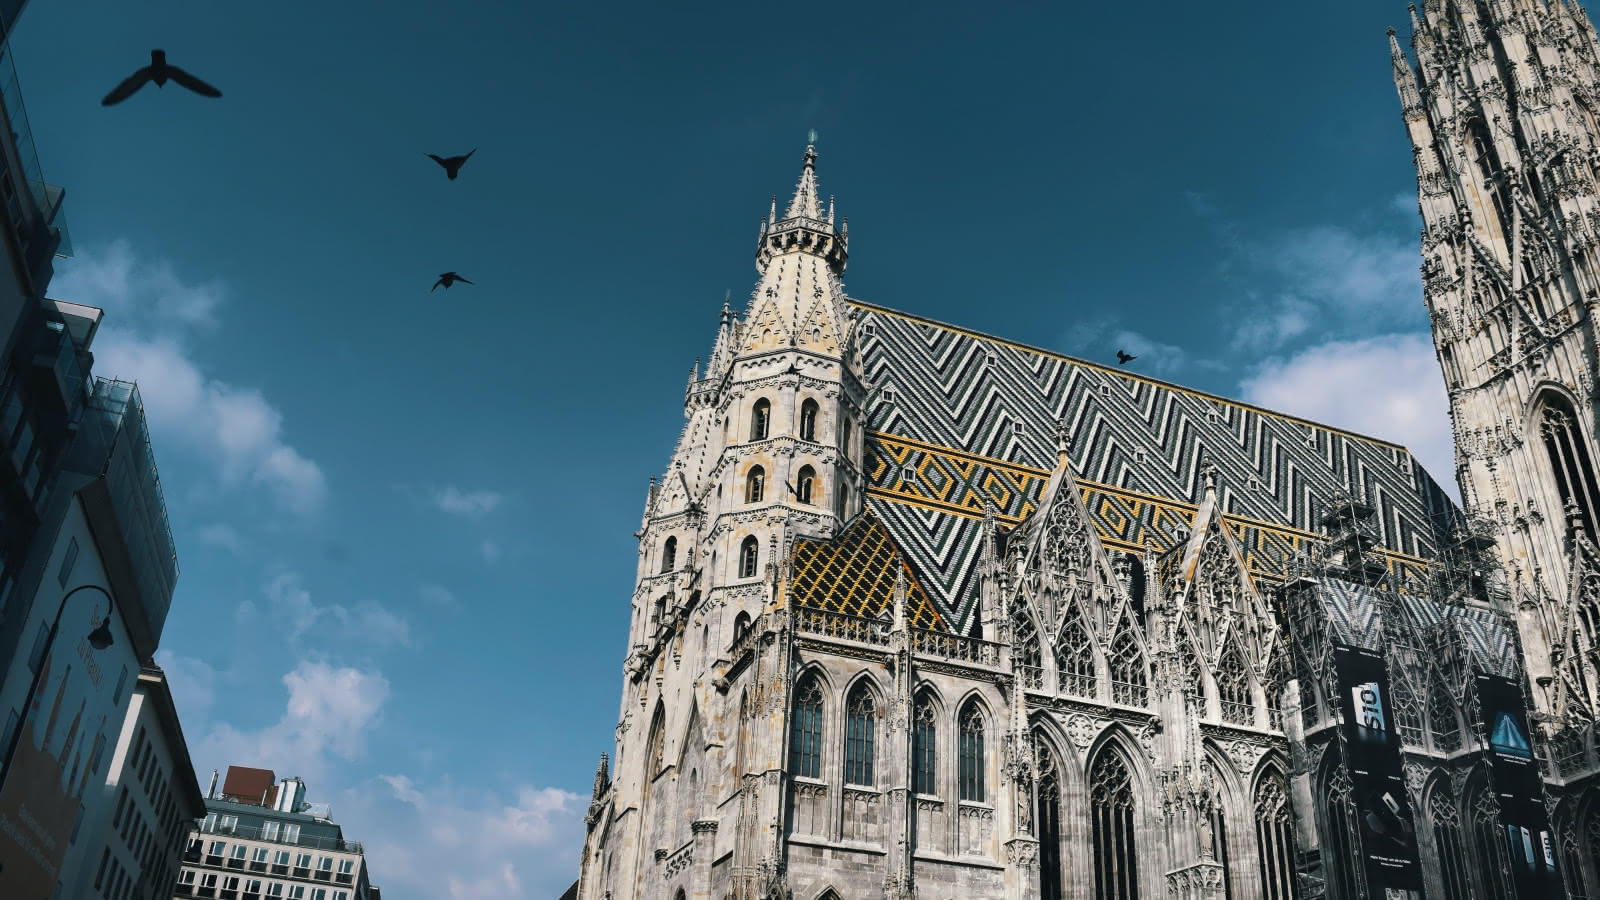 St. Stephen’s cathedral in vienna